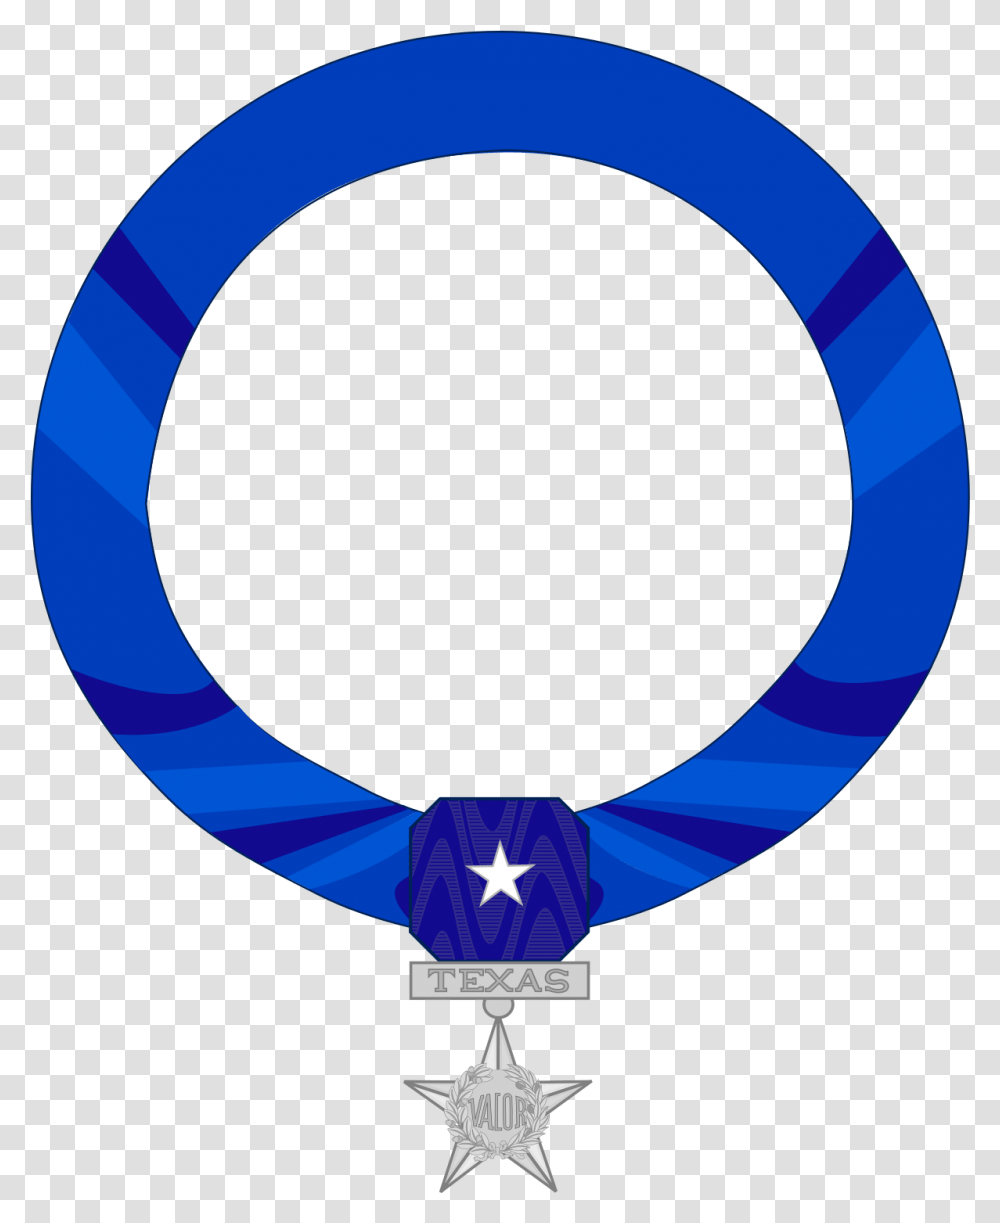 Texas Medal Of Valor Wikipedia Texas Medal Of Valor, Balloon, Art, Accessories, Accessory Transparent Png